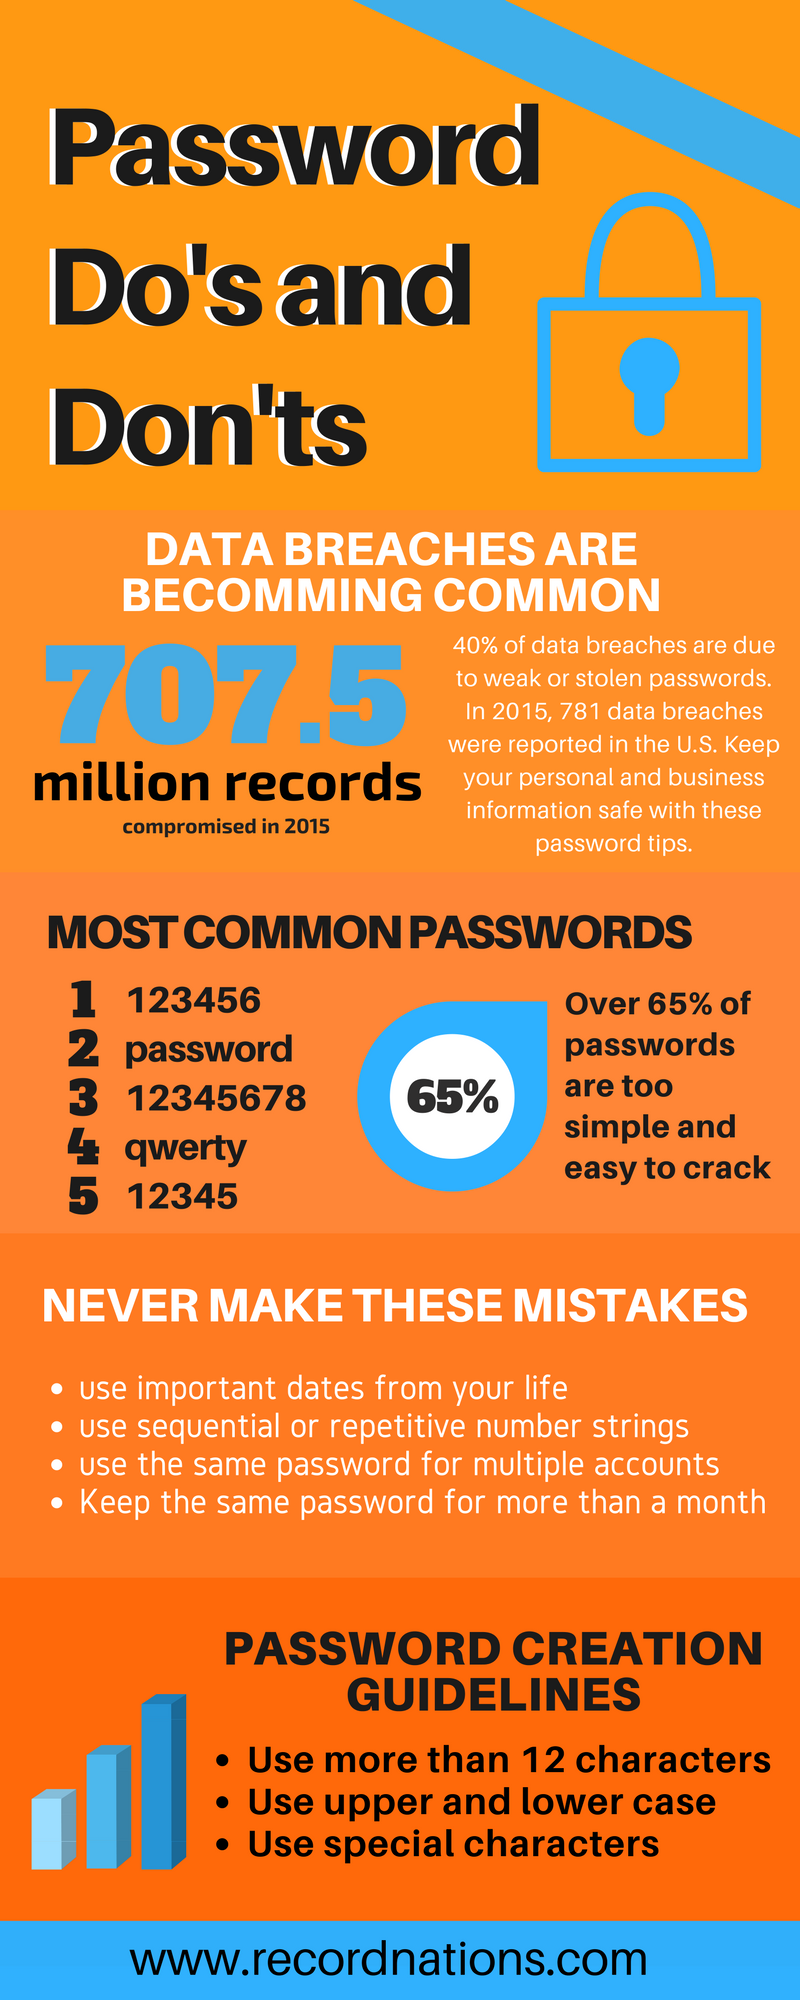 An infographic with tips on making strong passwords